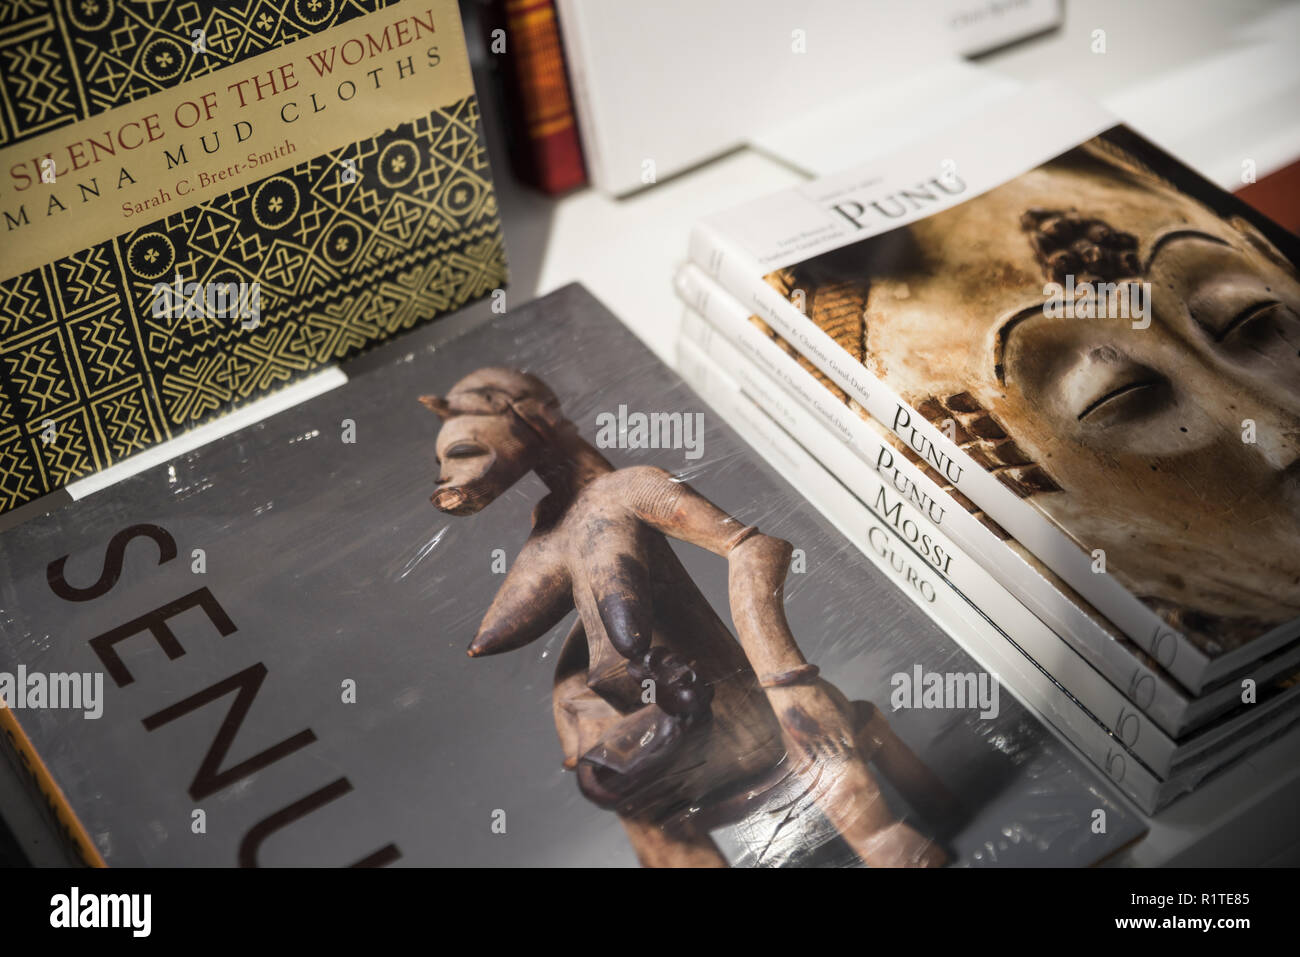 Historical books and cover of the art books displayed at Louvre Abu Dhabi, UAE Stock Photo